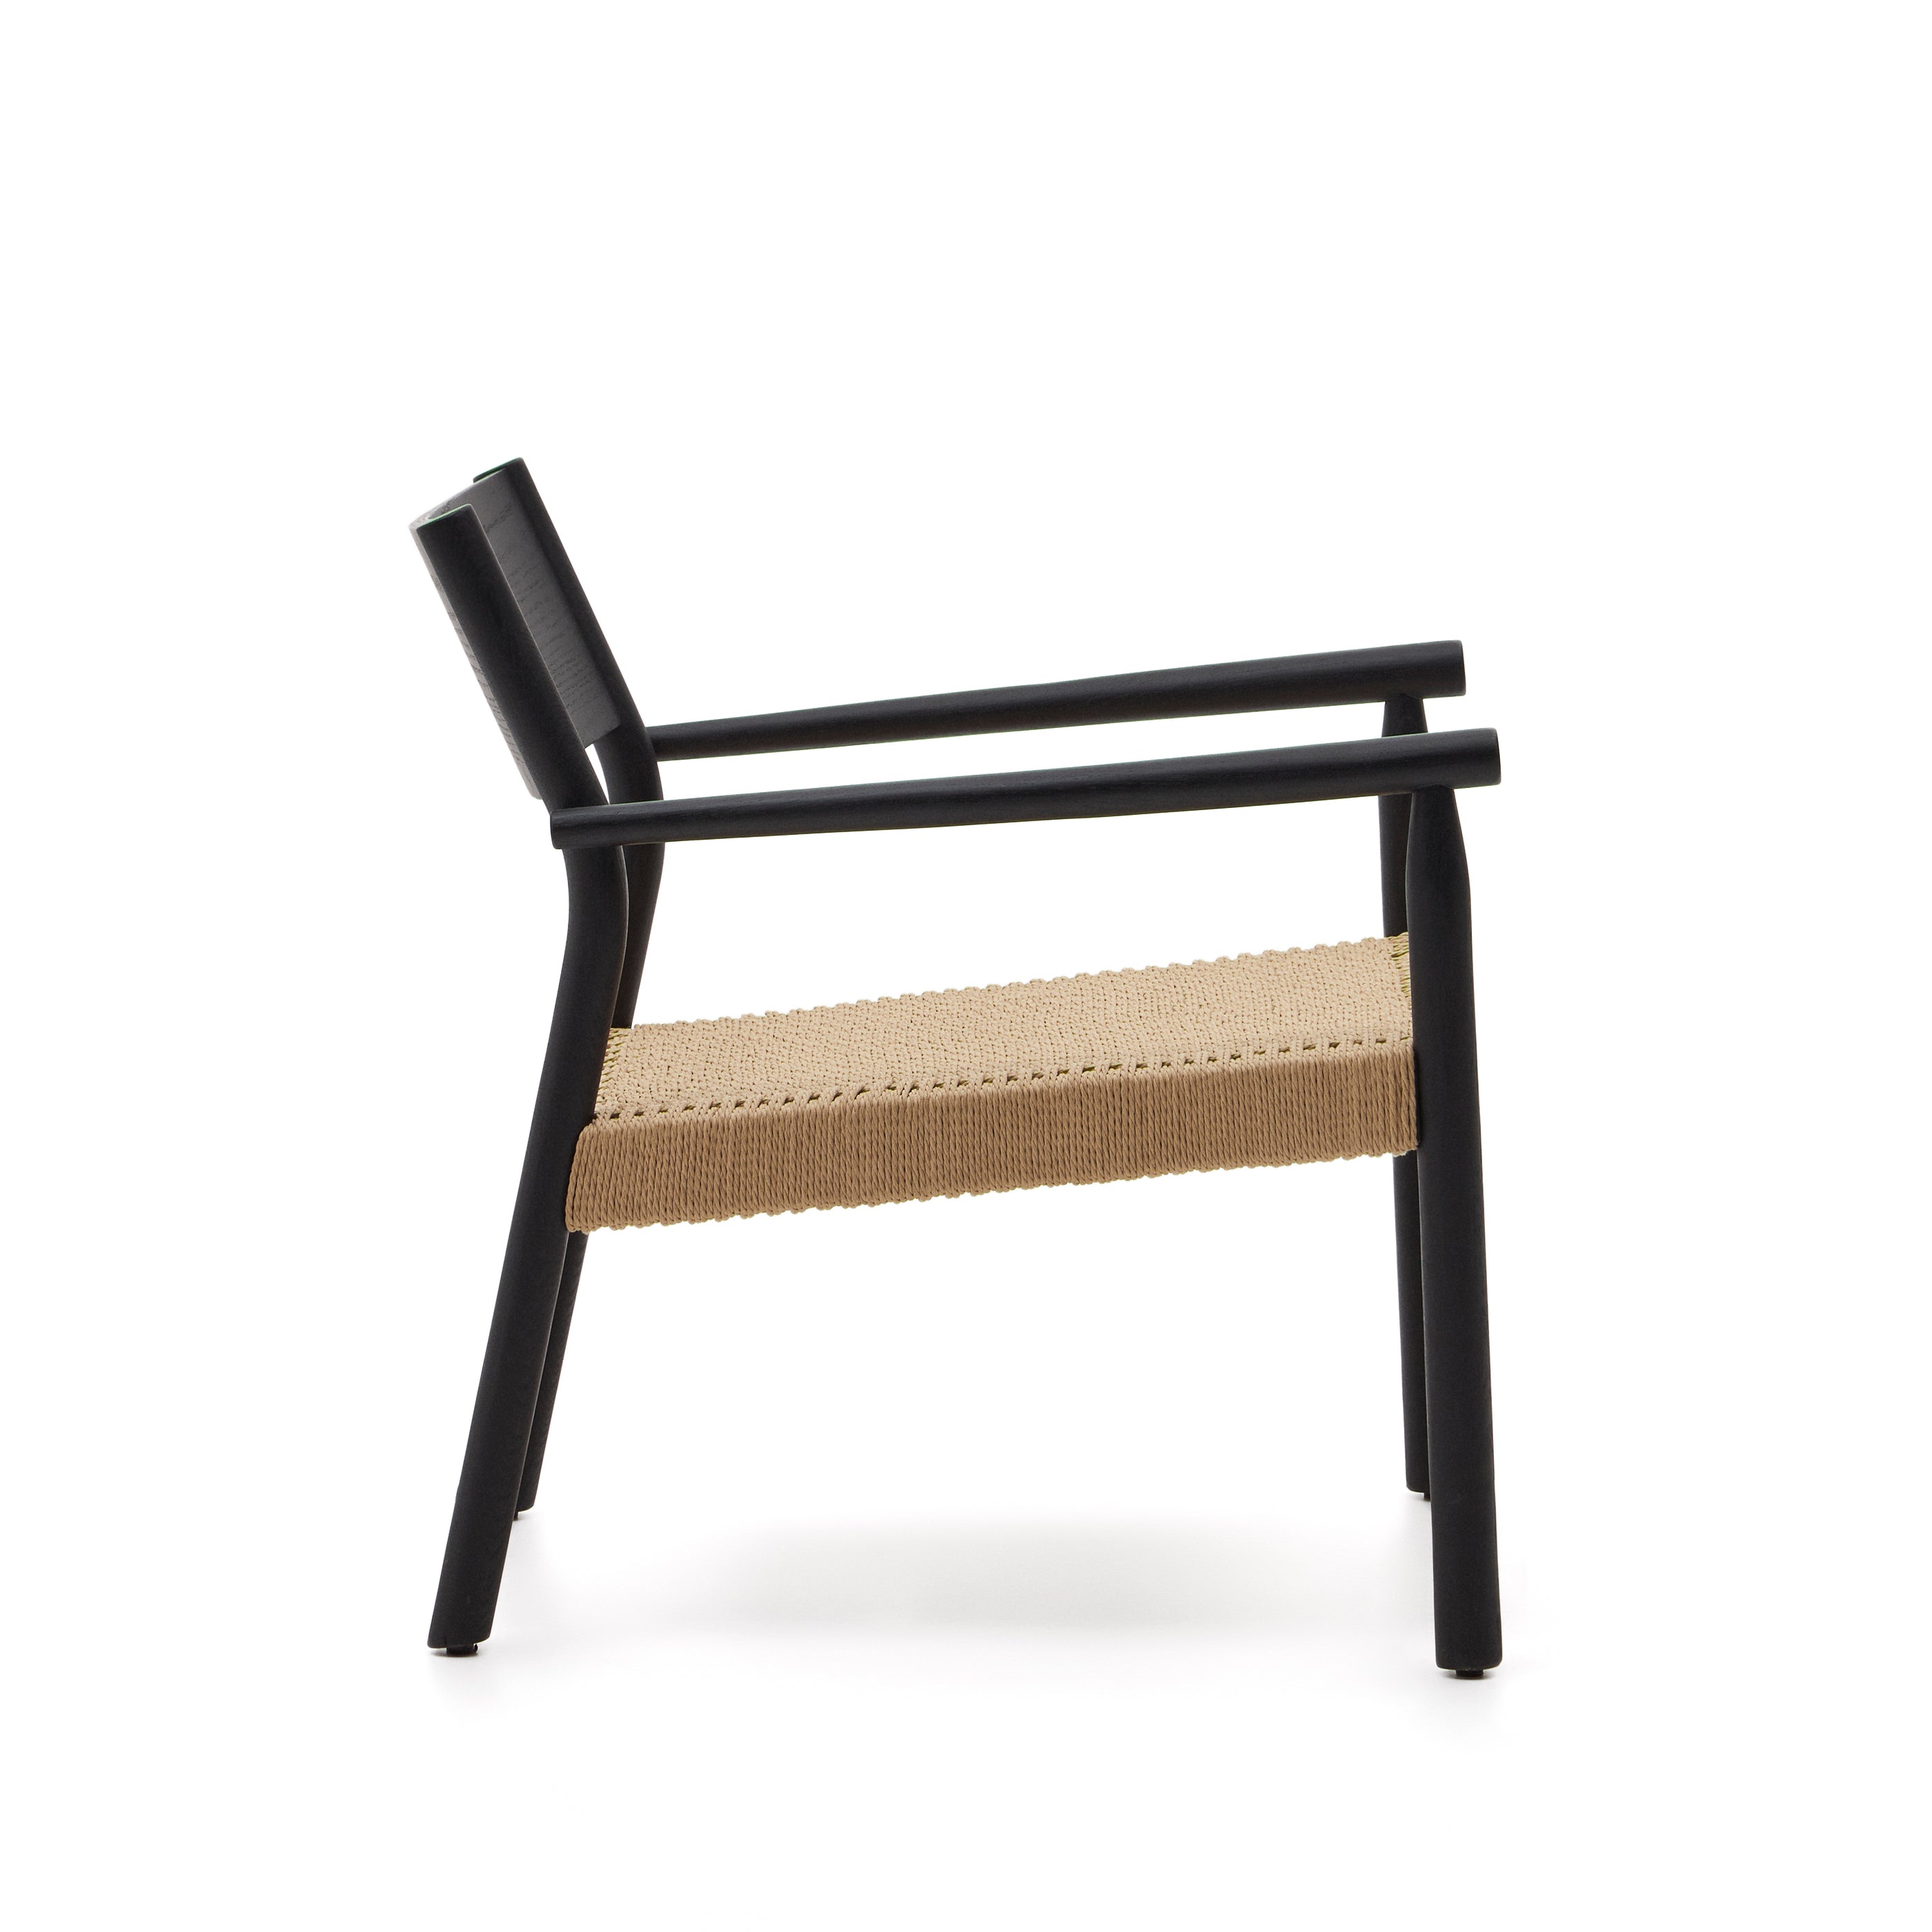 Yalia armchair in solid oak 100% FSC with a black finish and paper rope seat